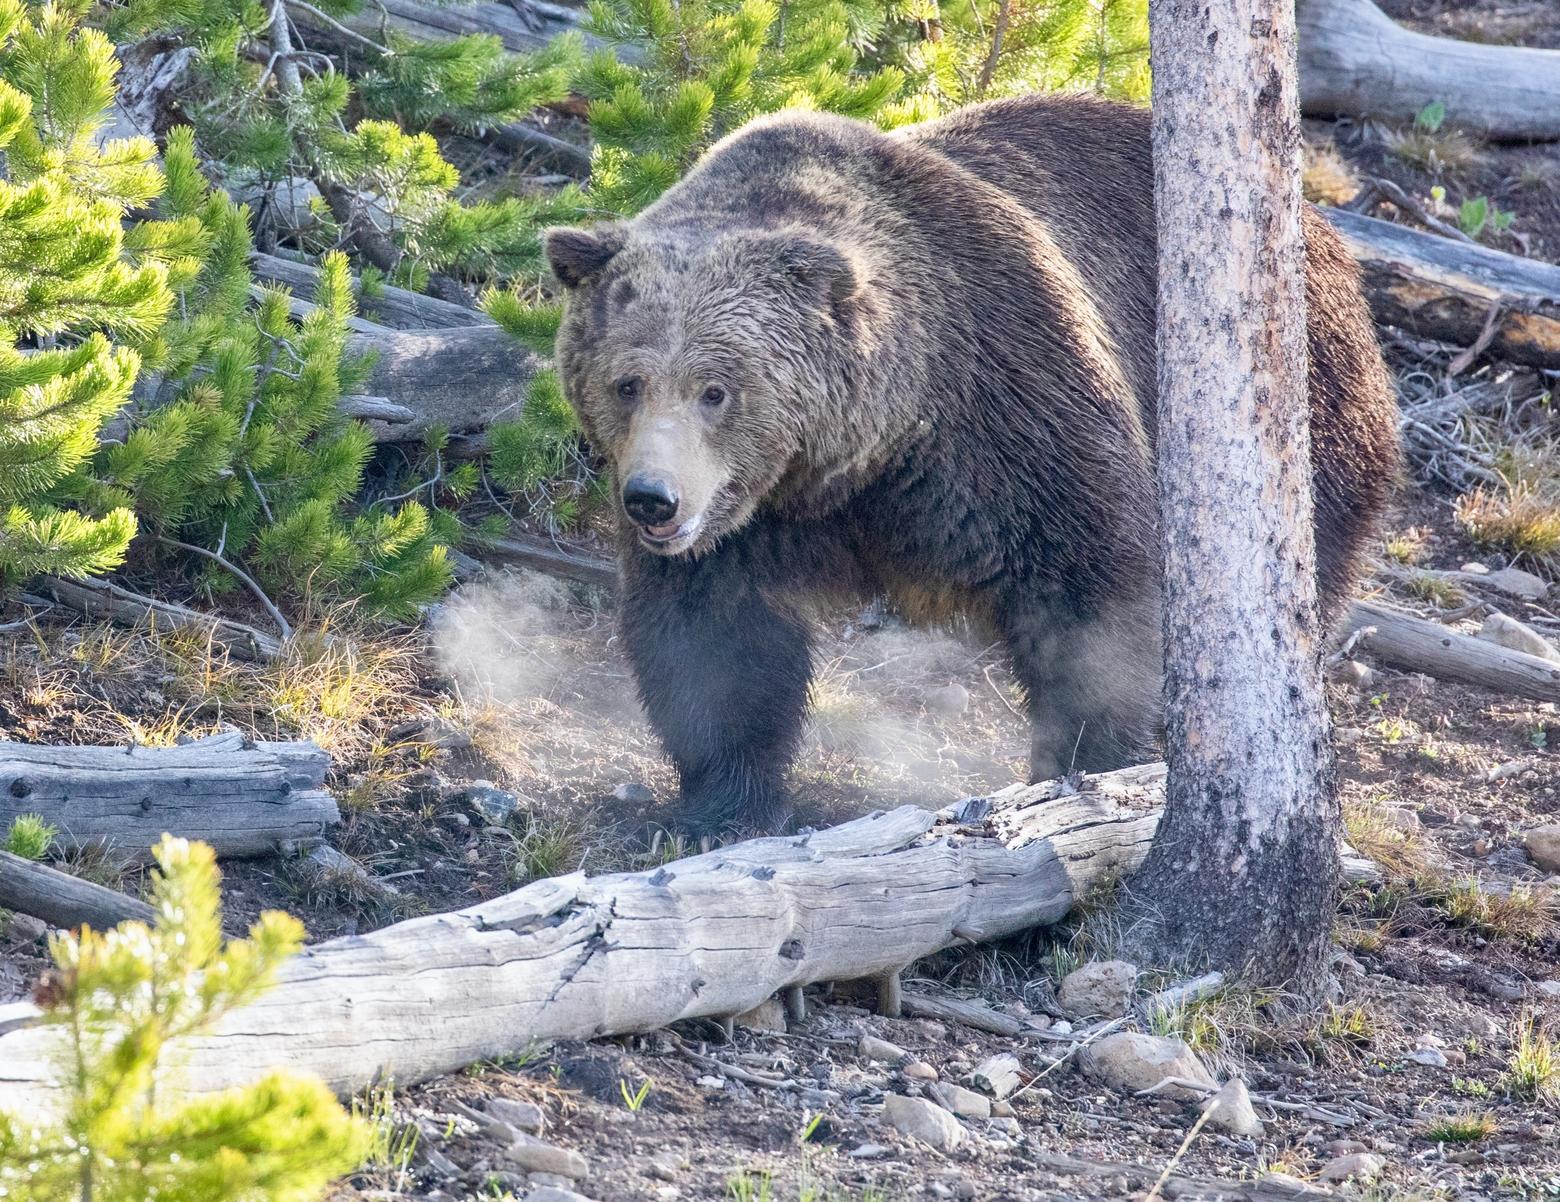 In its latest estimate using a new counting method in the demographic monitoring area, the Interagency Grizzly Bear Study Team estimates that the Greater Yellowstone Ecosystem is home to 965 grizzly bears. Photo by Jim Peaco/NPS